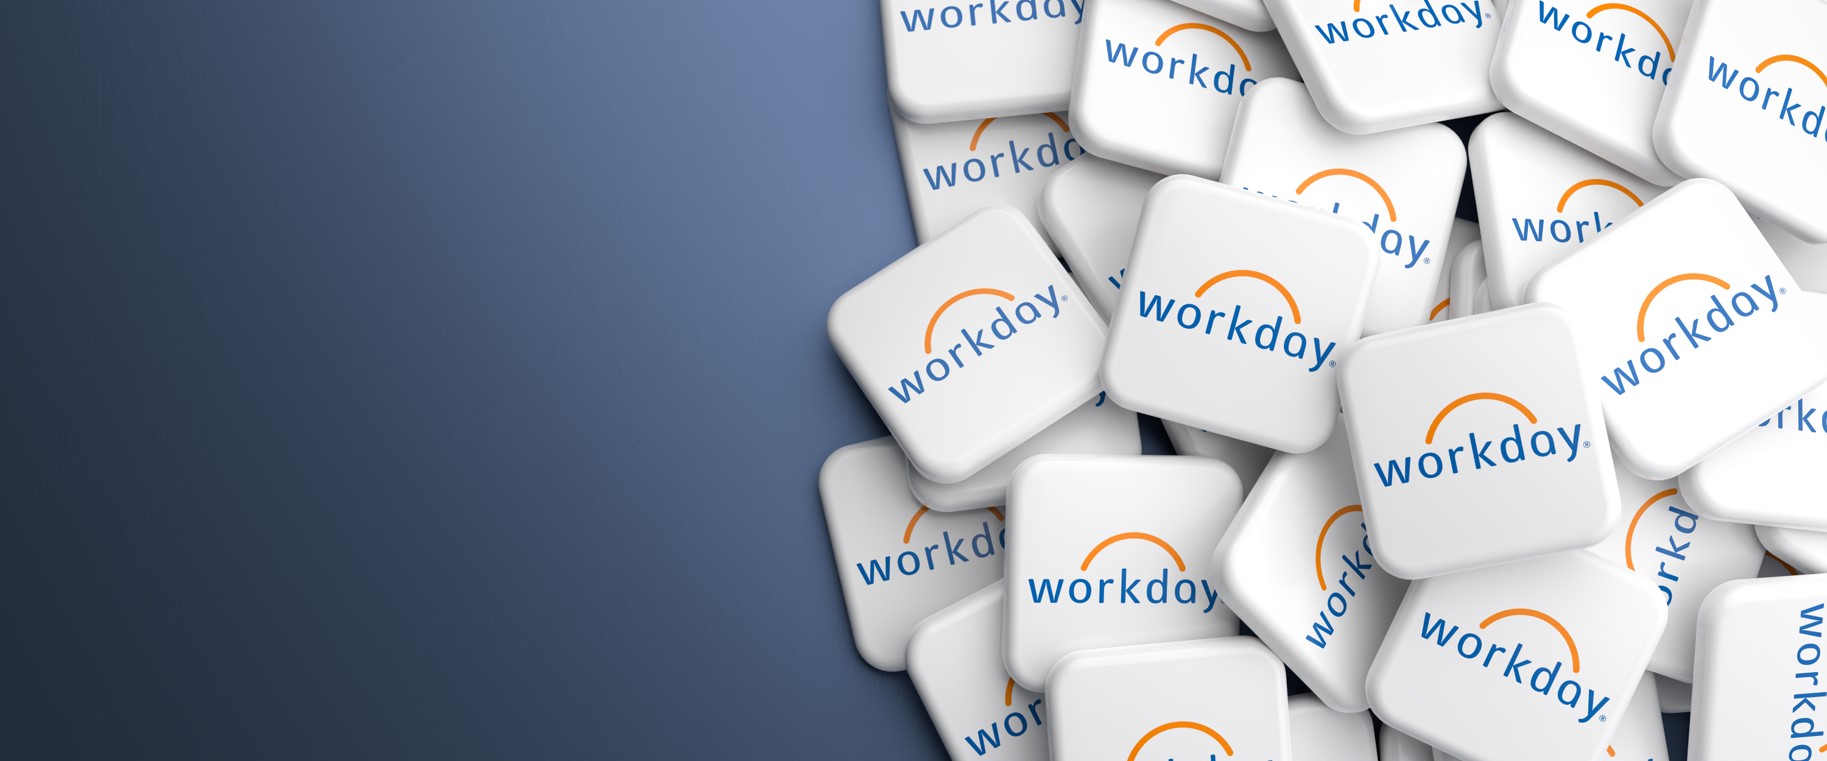 Image of white tiles featuring the Workday logo.